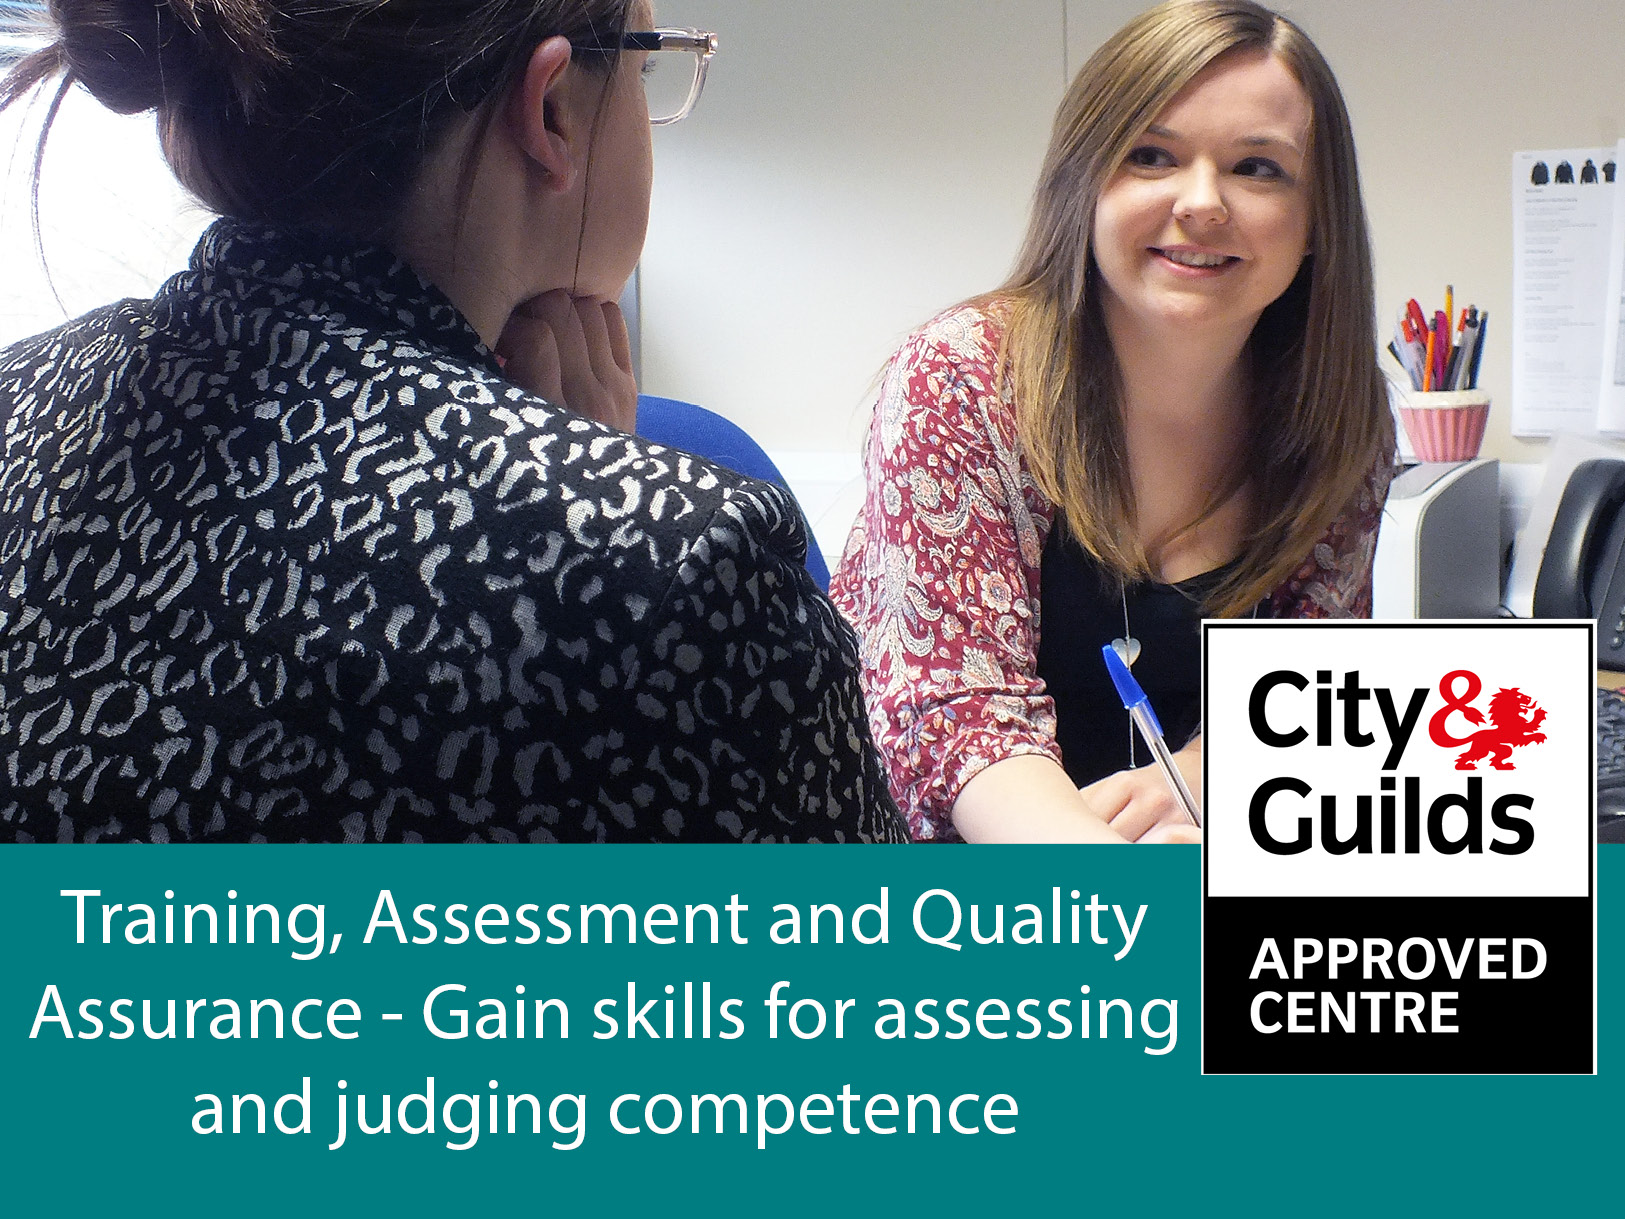 TAQA Qualifications certified by City & Guilds